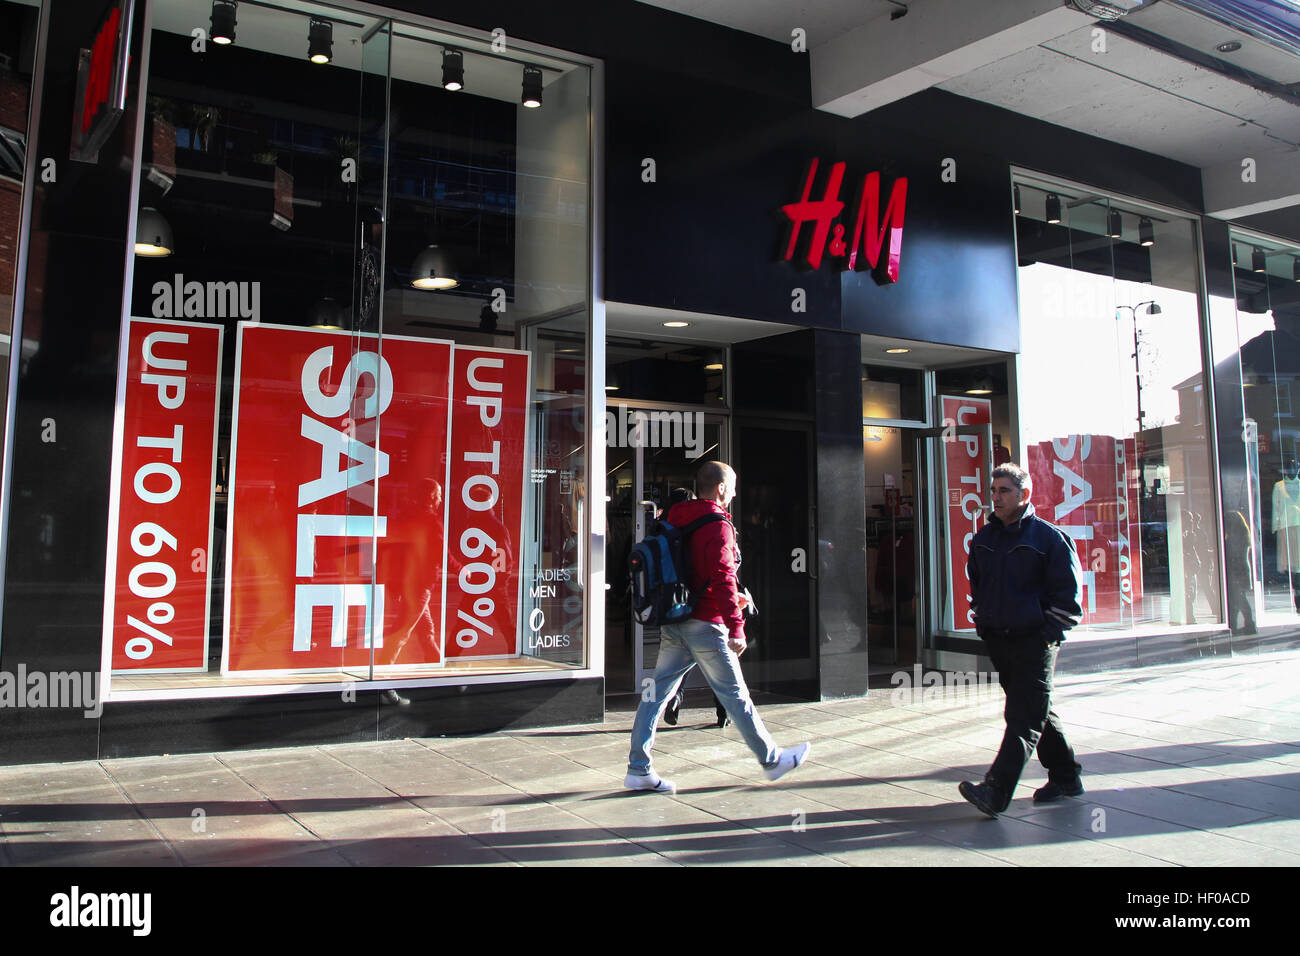 Wood Green, North London 26 Dec 2016 - Boxing day sales starts in H&M store  in Wood Green. Credit: Dinendra Haria/Alamy Live News Stock Photo - Alamy